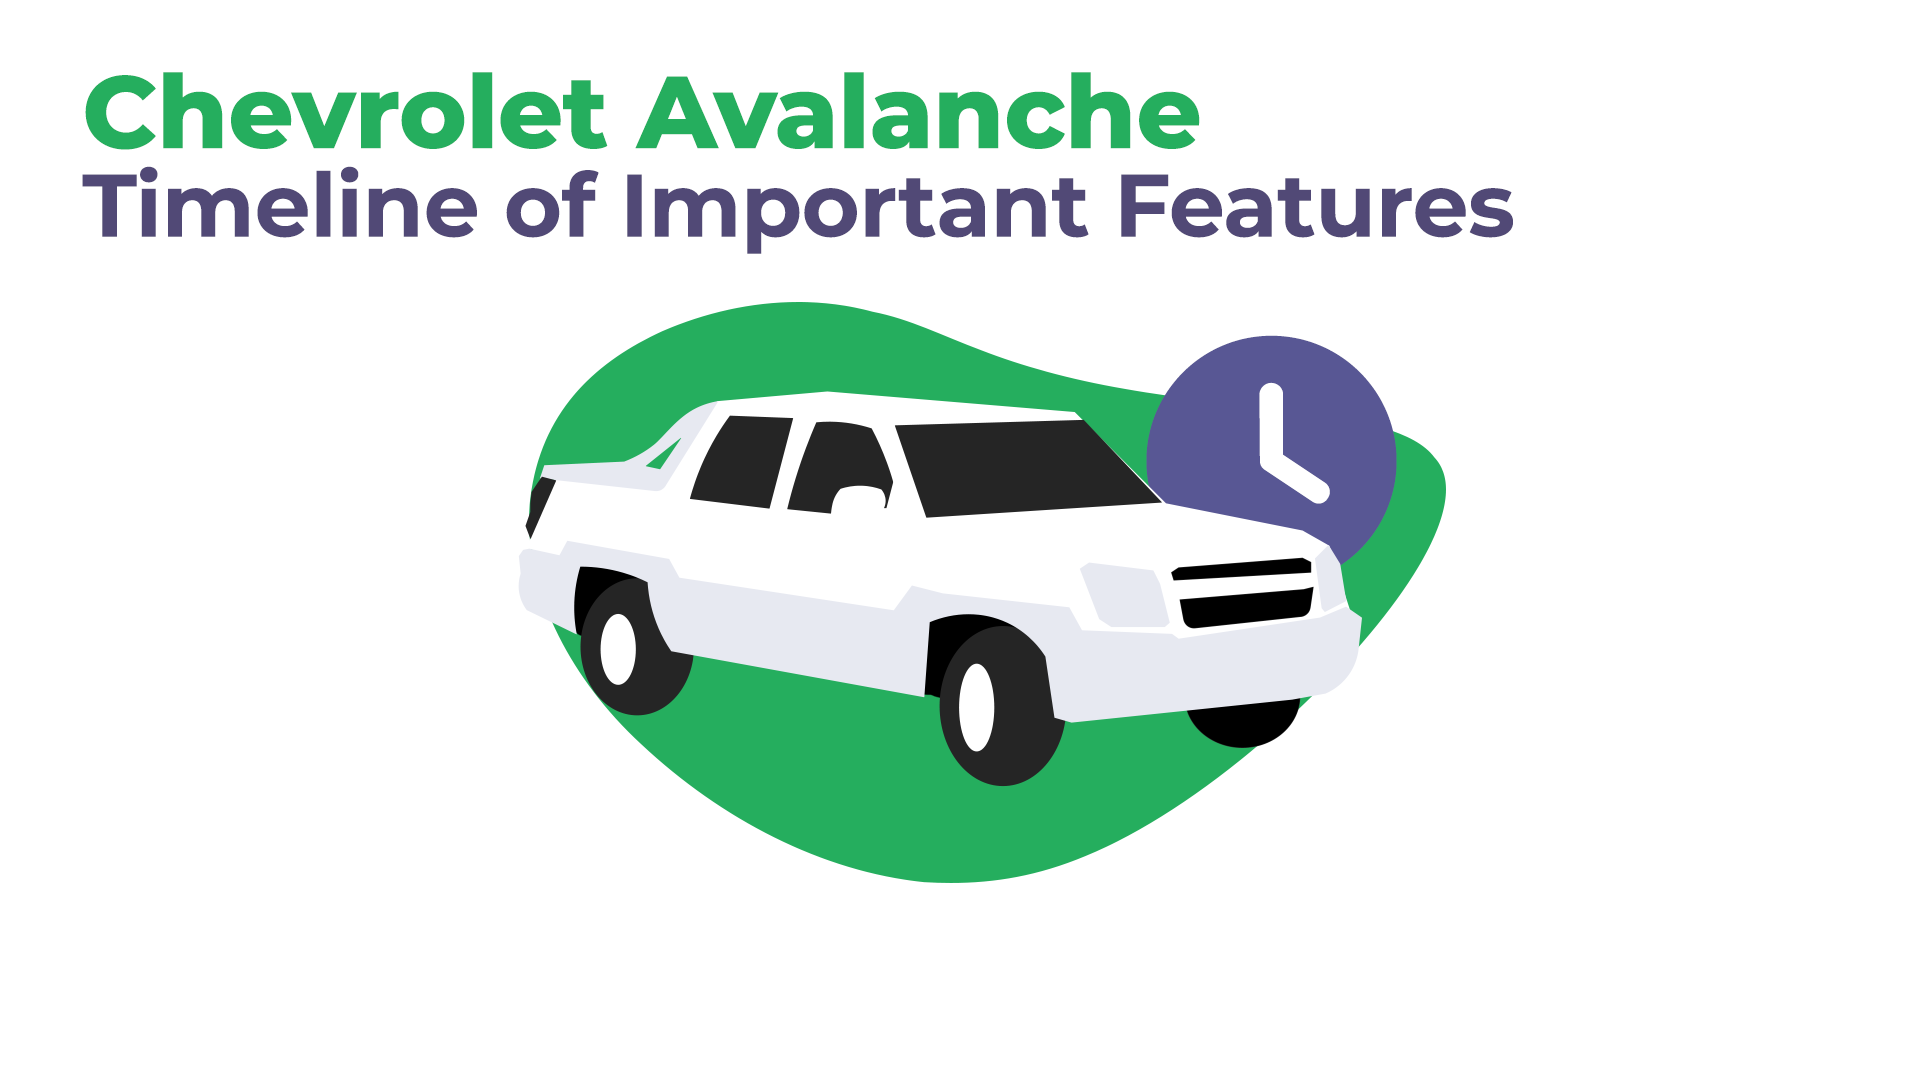 Chevrolet Avalanche Timeline of Important Features